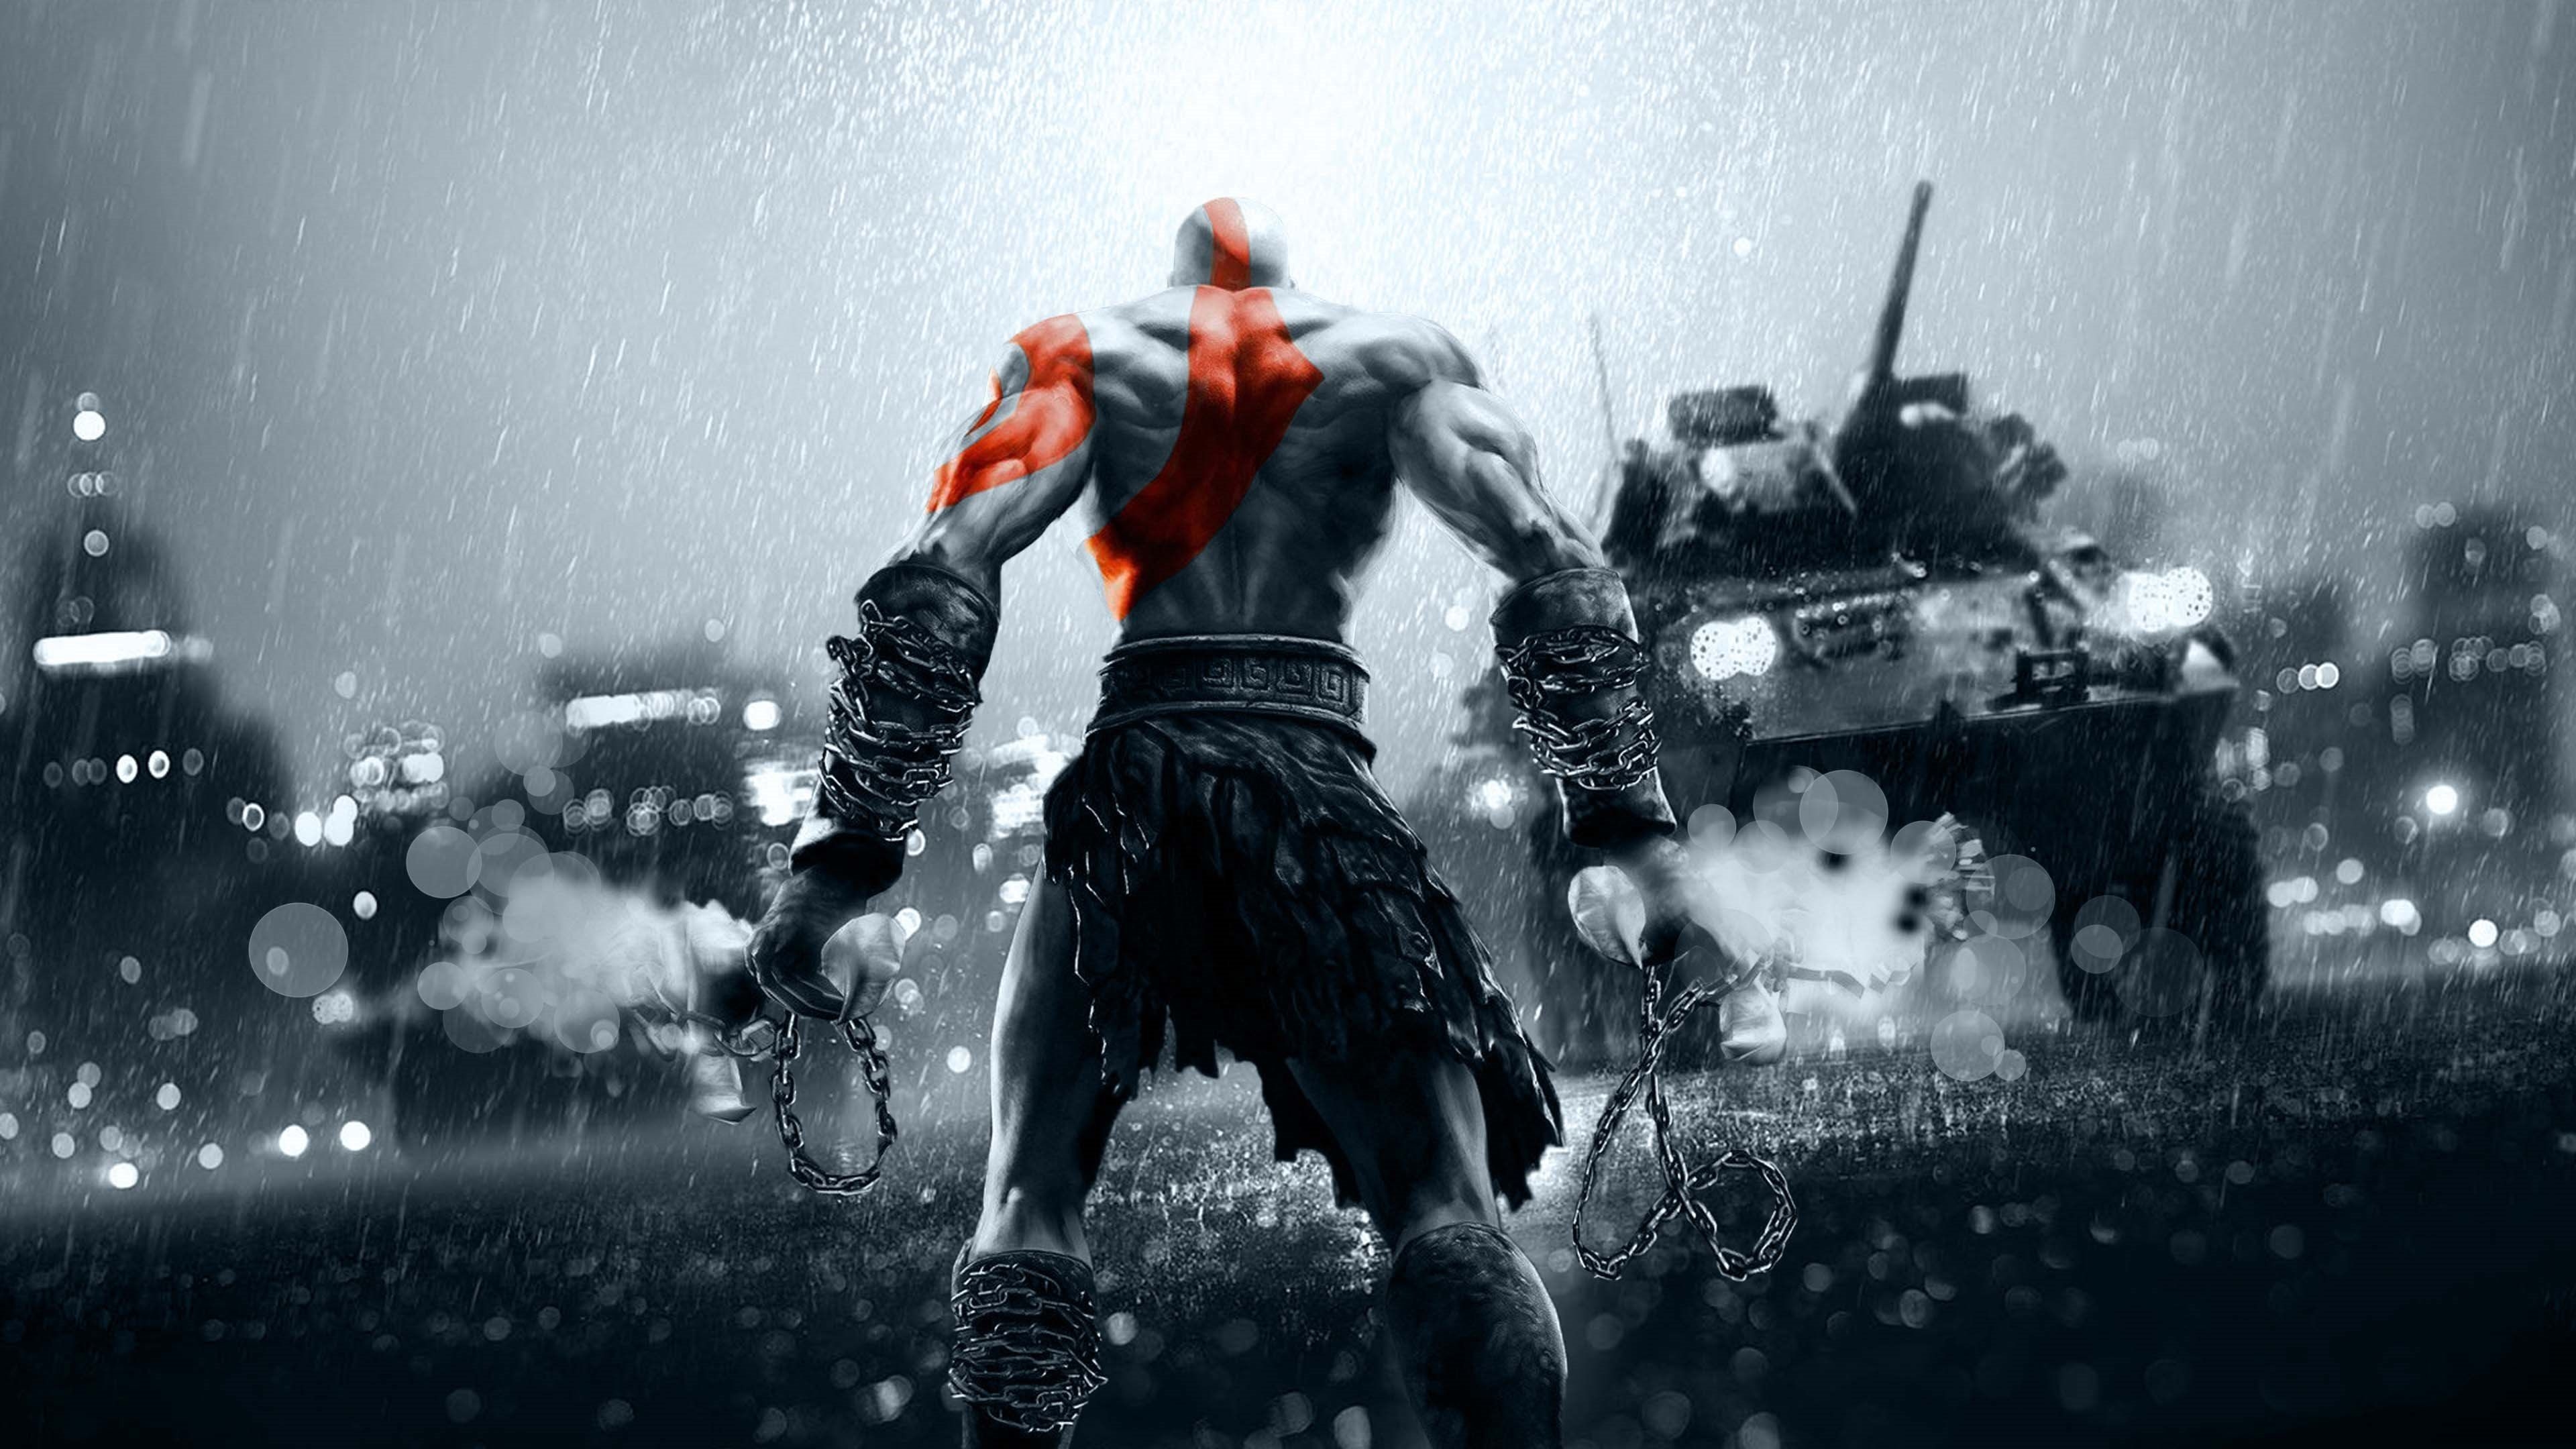 New God Of War Background Wallpaper Hd Games 4k Wallpapers Images Photos And Background